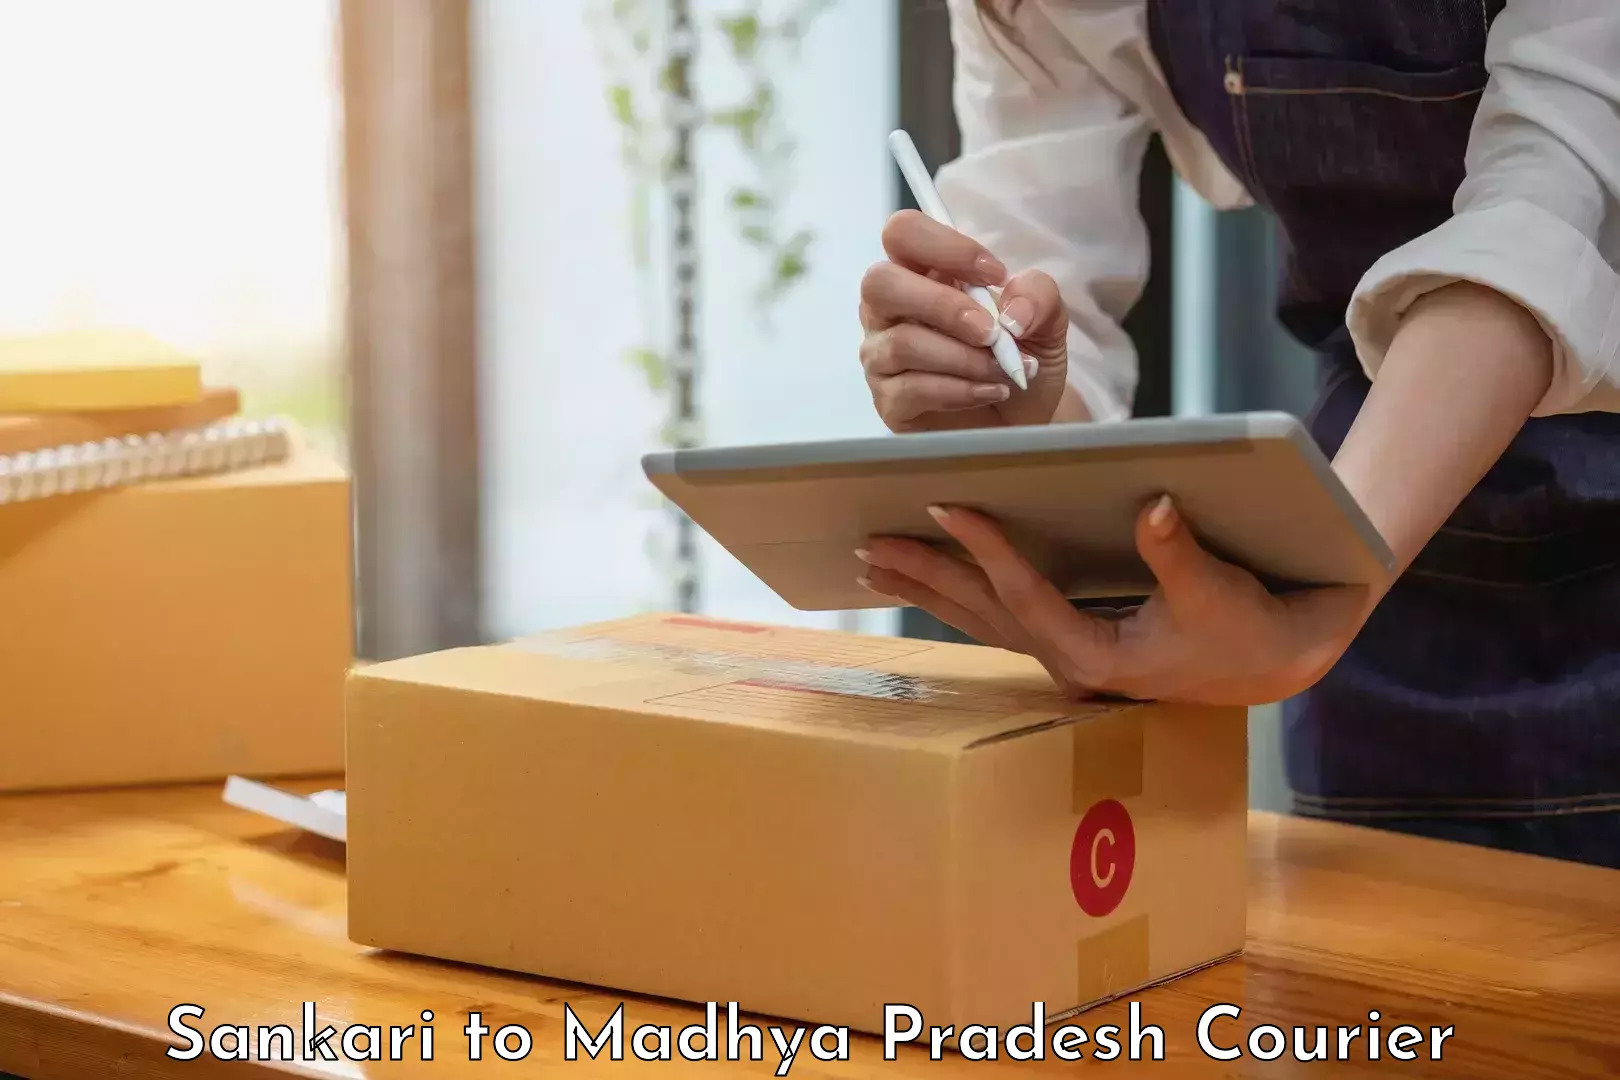 State-of-the-art courier technology Sankari to Indore